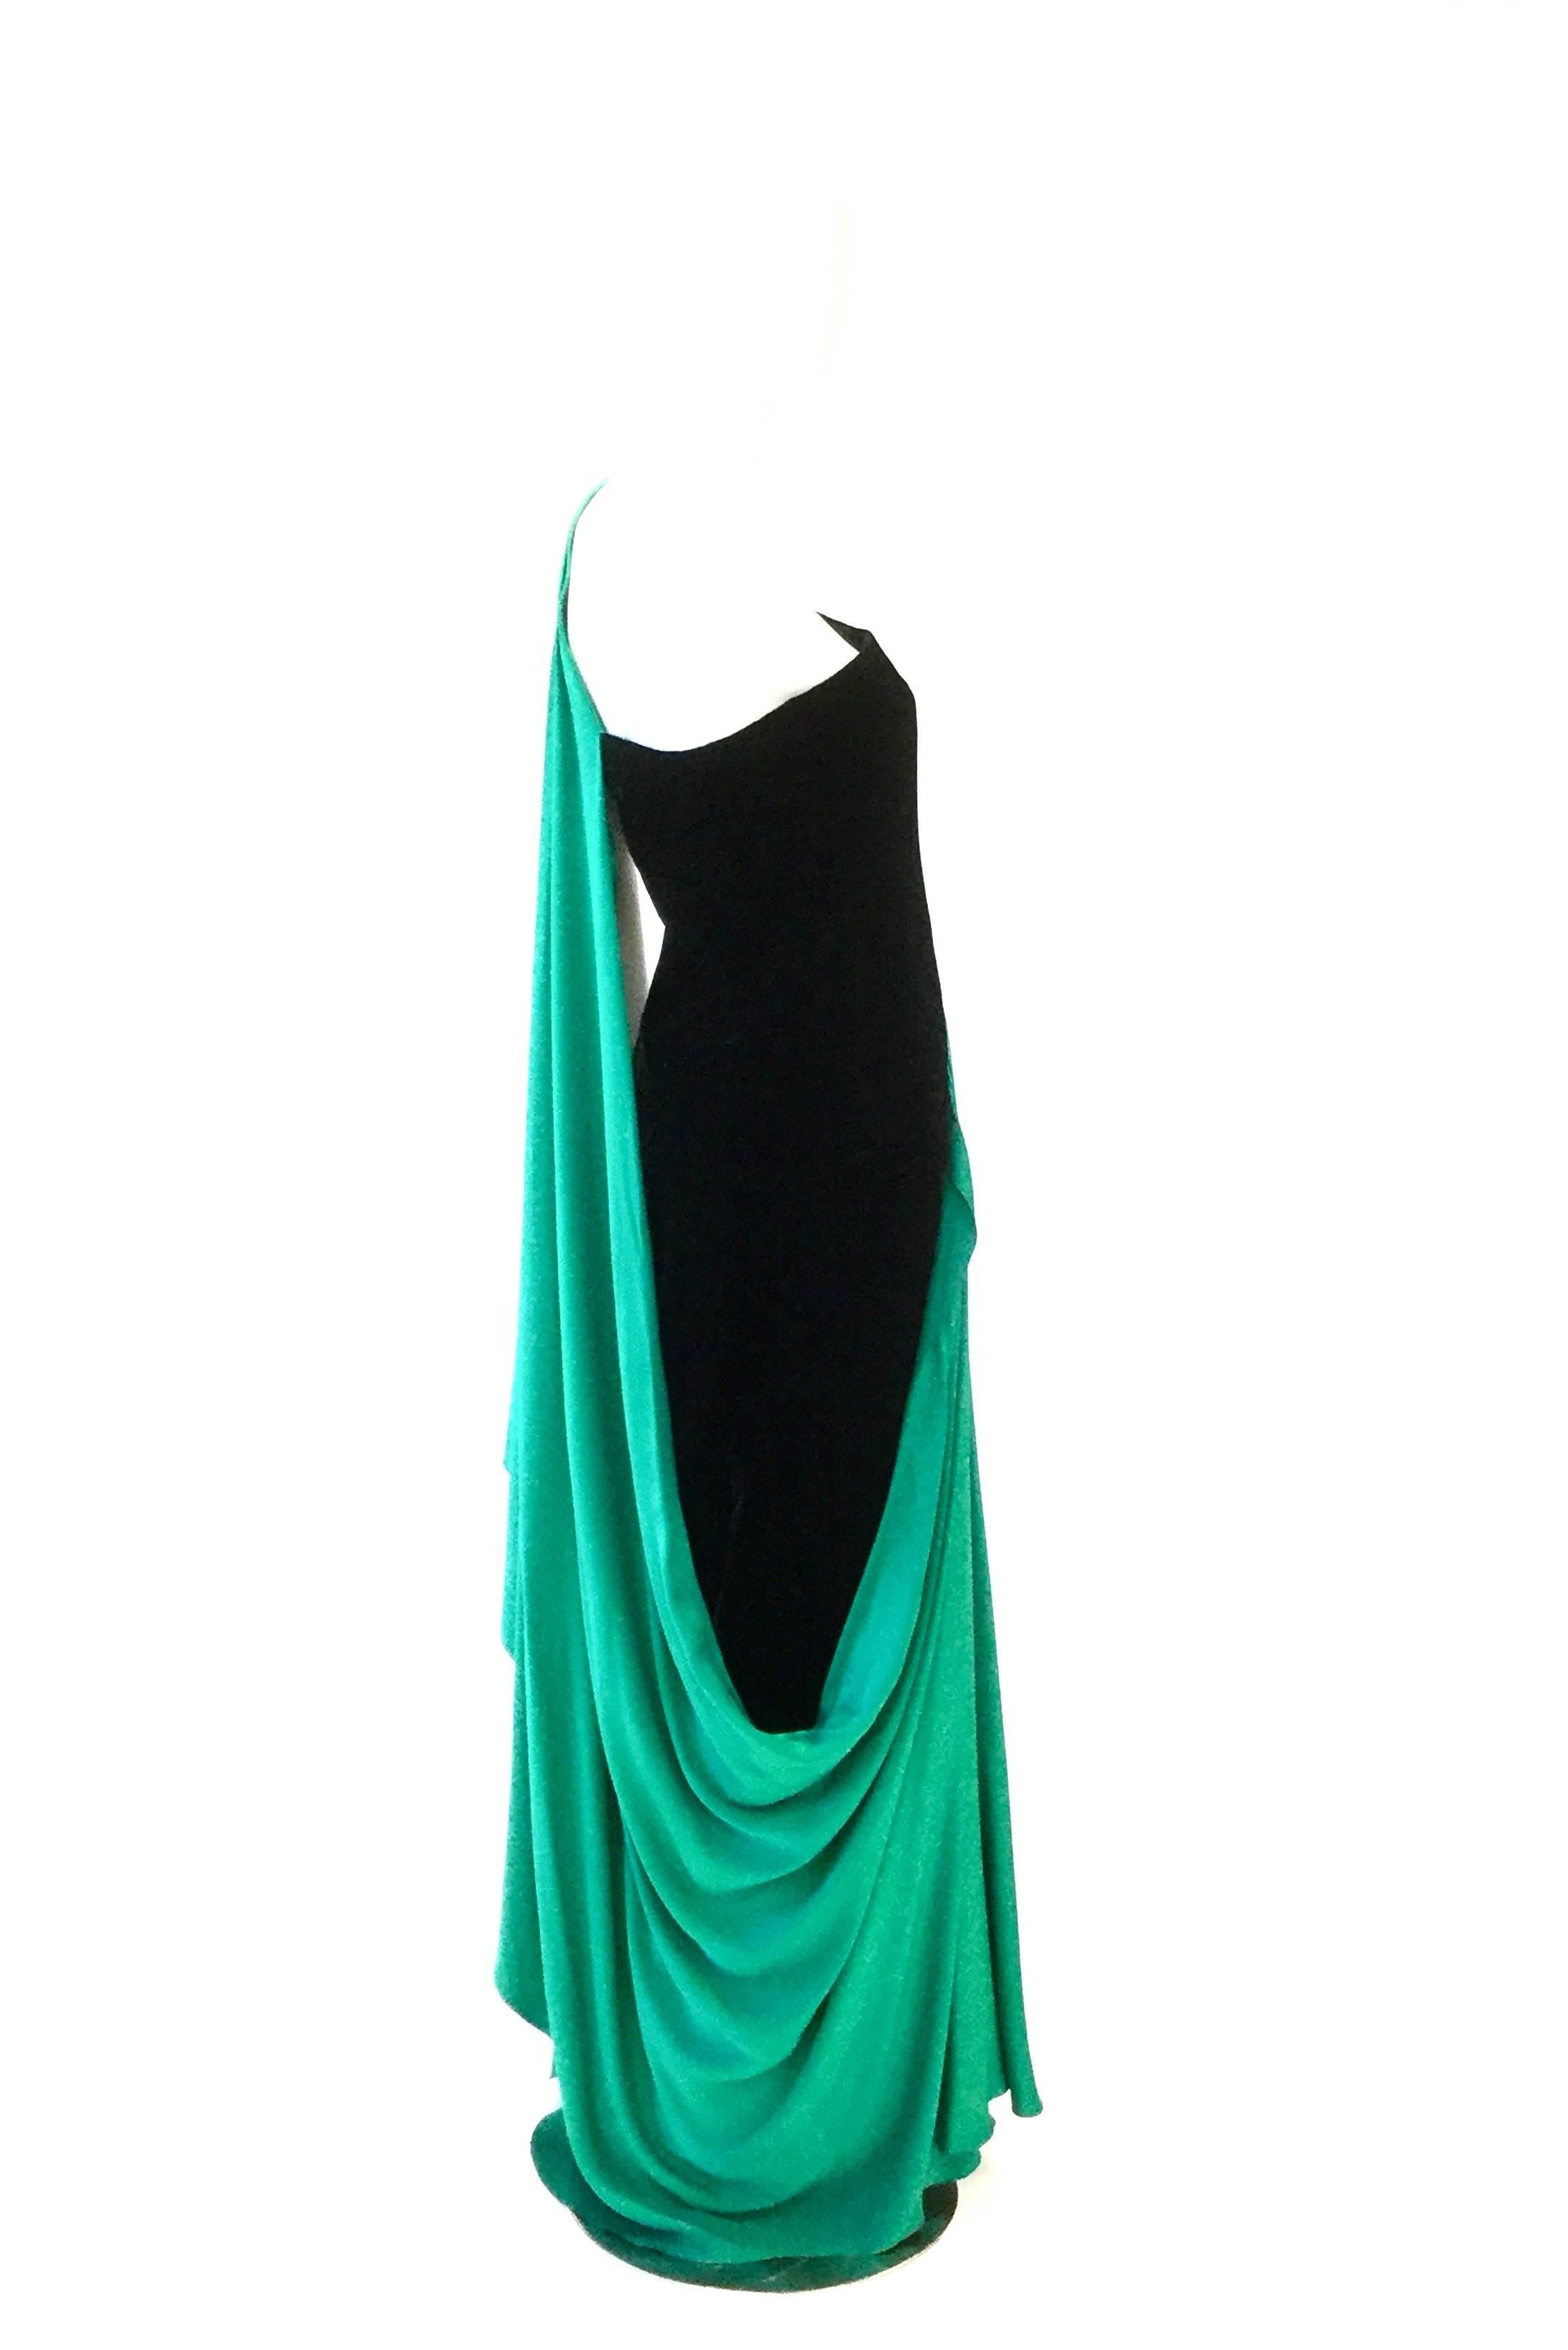 Exquisite French designed gown by Jaqueline de Ribes. This body of the gown is made sumptuous black velvet, accented by a striking emerald green fine silk shoulder cape drape. The one-shoulder drape-strap has elegant pleats at the top, causing the